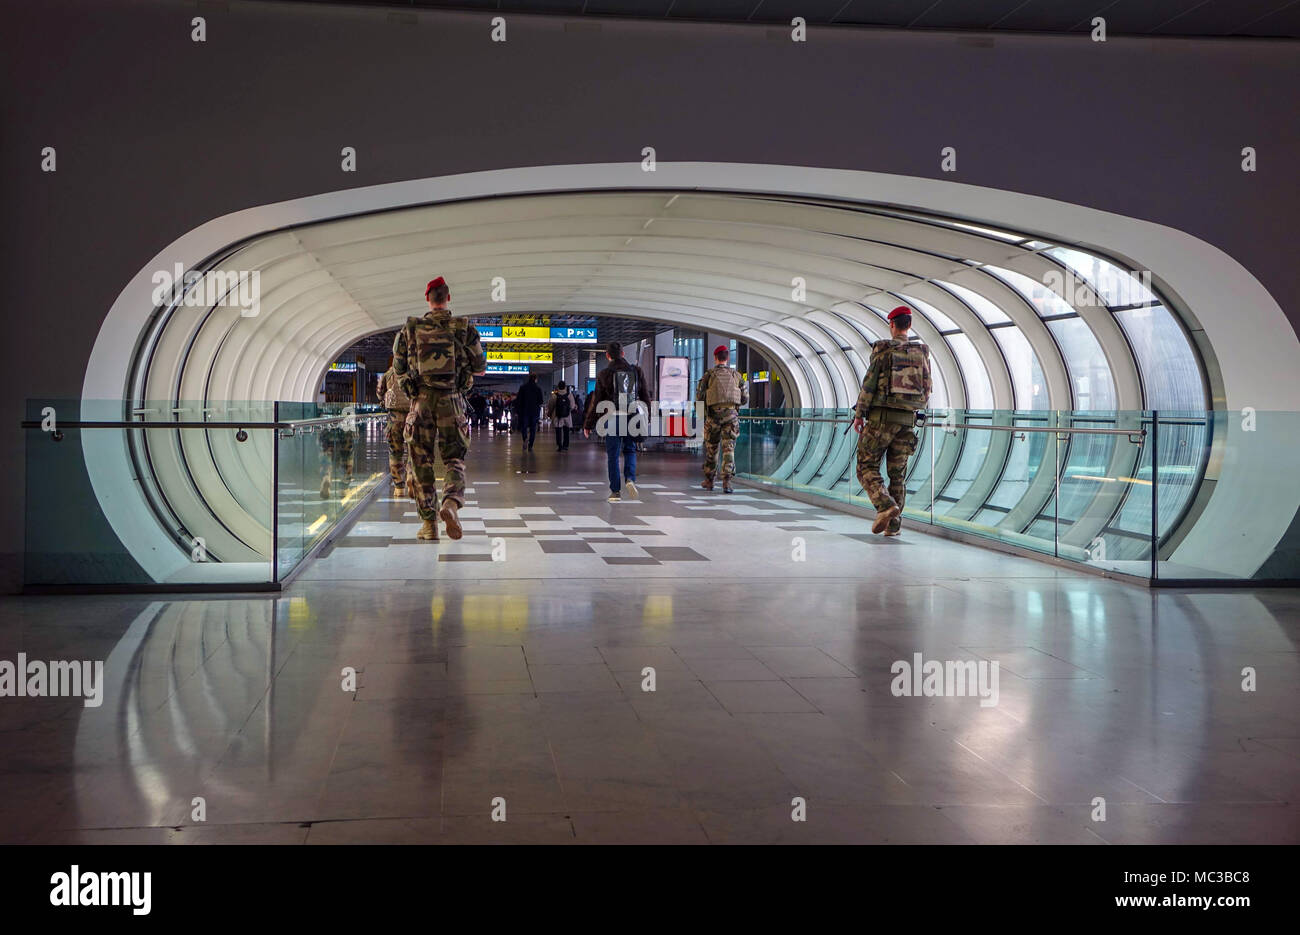 Pedestrian tunnel with four soldiers walking through, Toulouse Blagnac airport, France Stock Photo